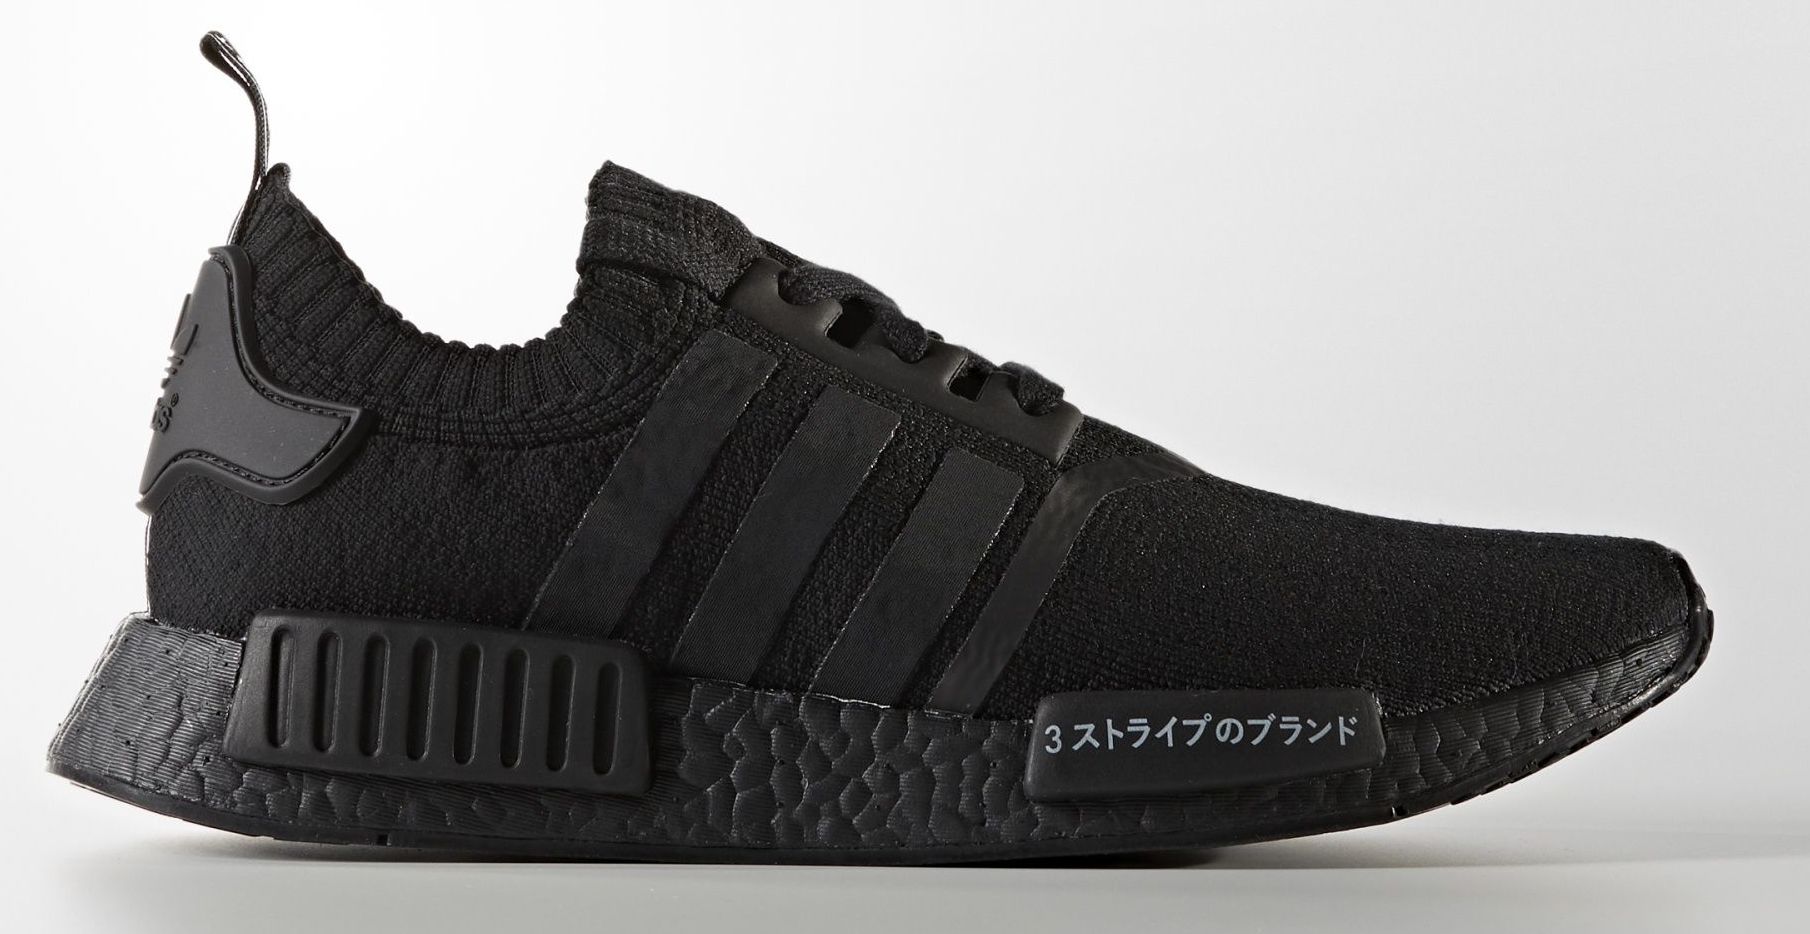 Japan Pack' Adidas NMDs in Triple White Triple Black Release on Aug. 11 | Complex